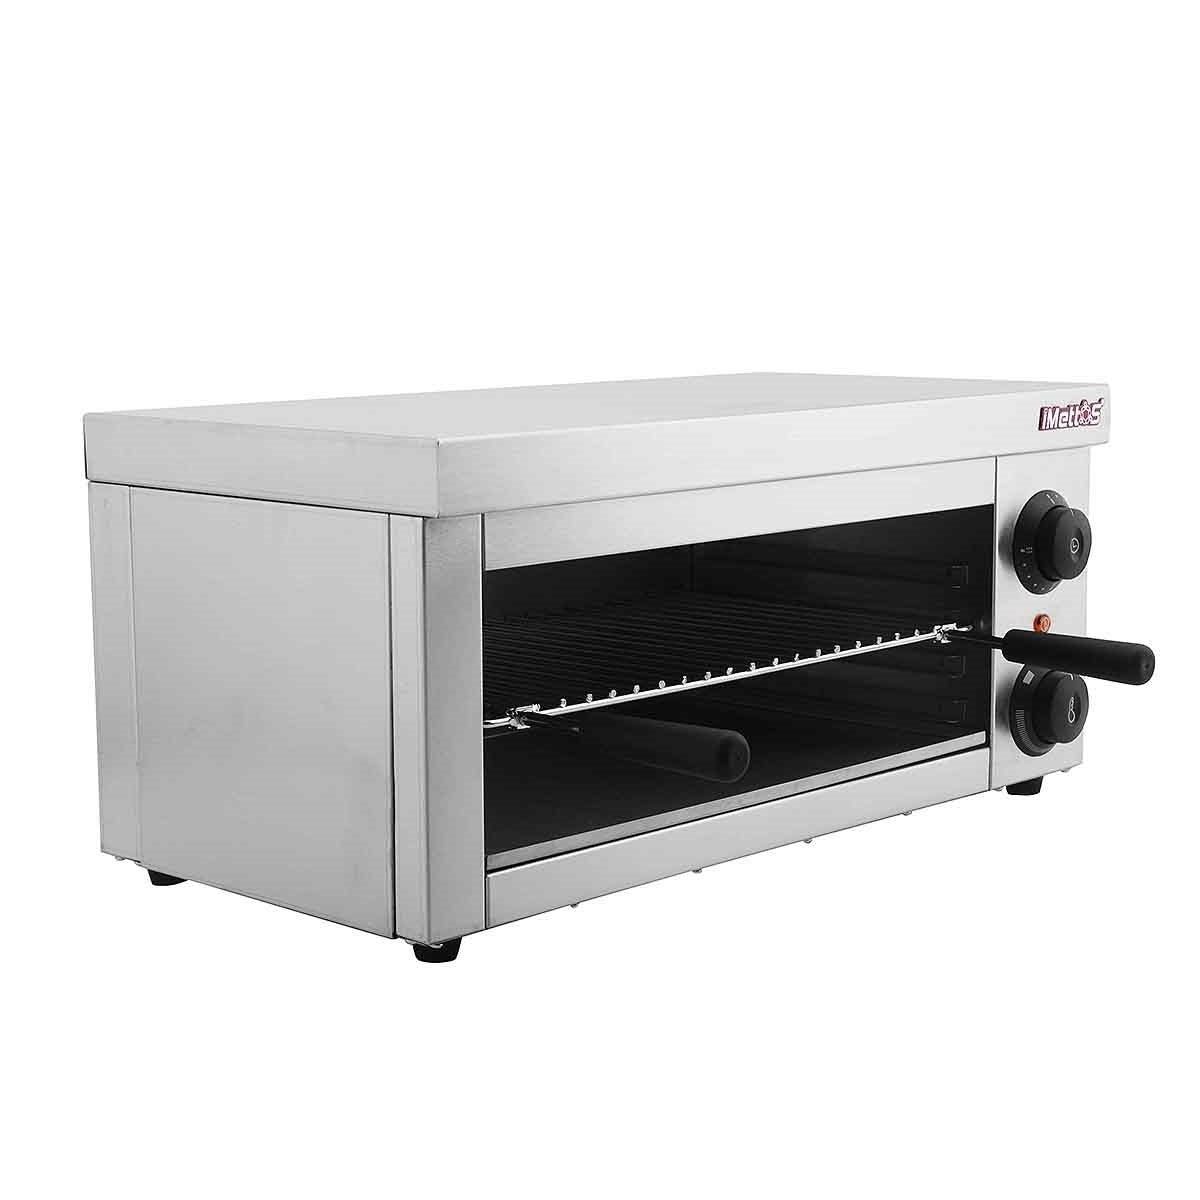 iMettos Commercial Electric Salamander Grill - 101025 Salamander Grills iMettos   